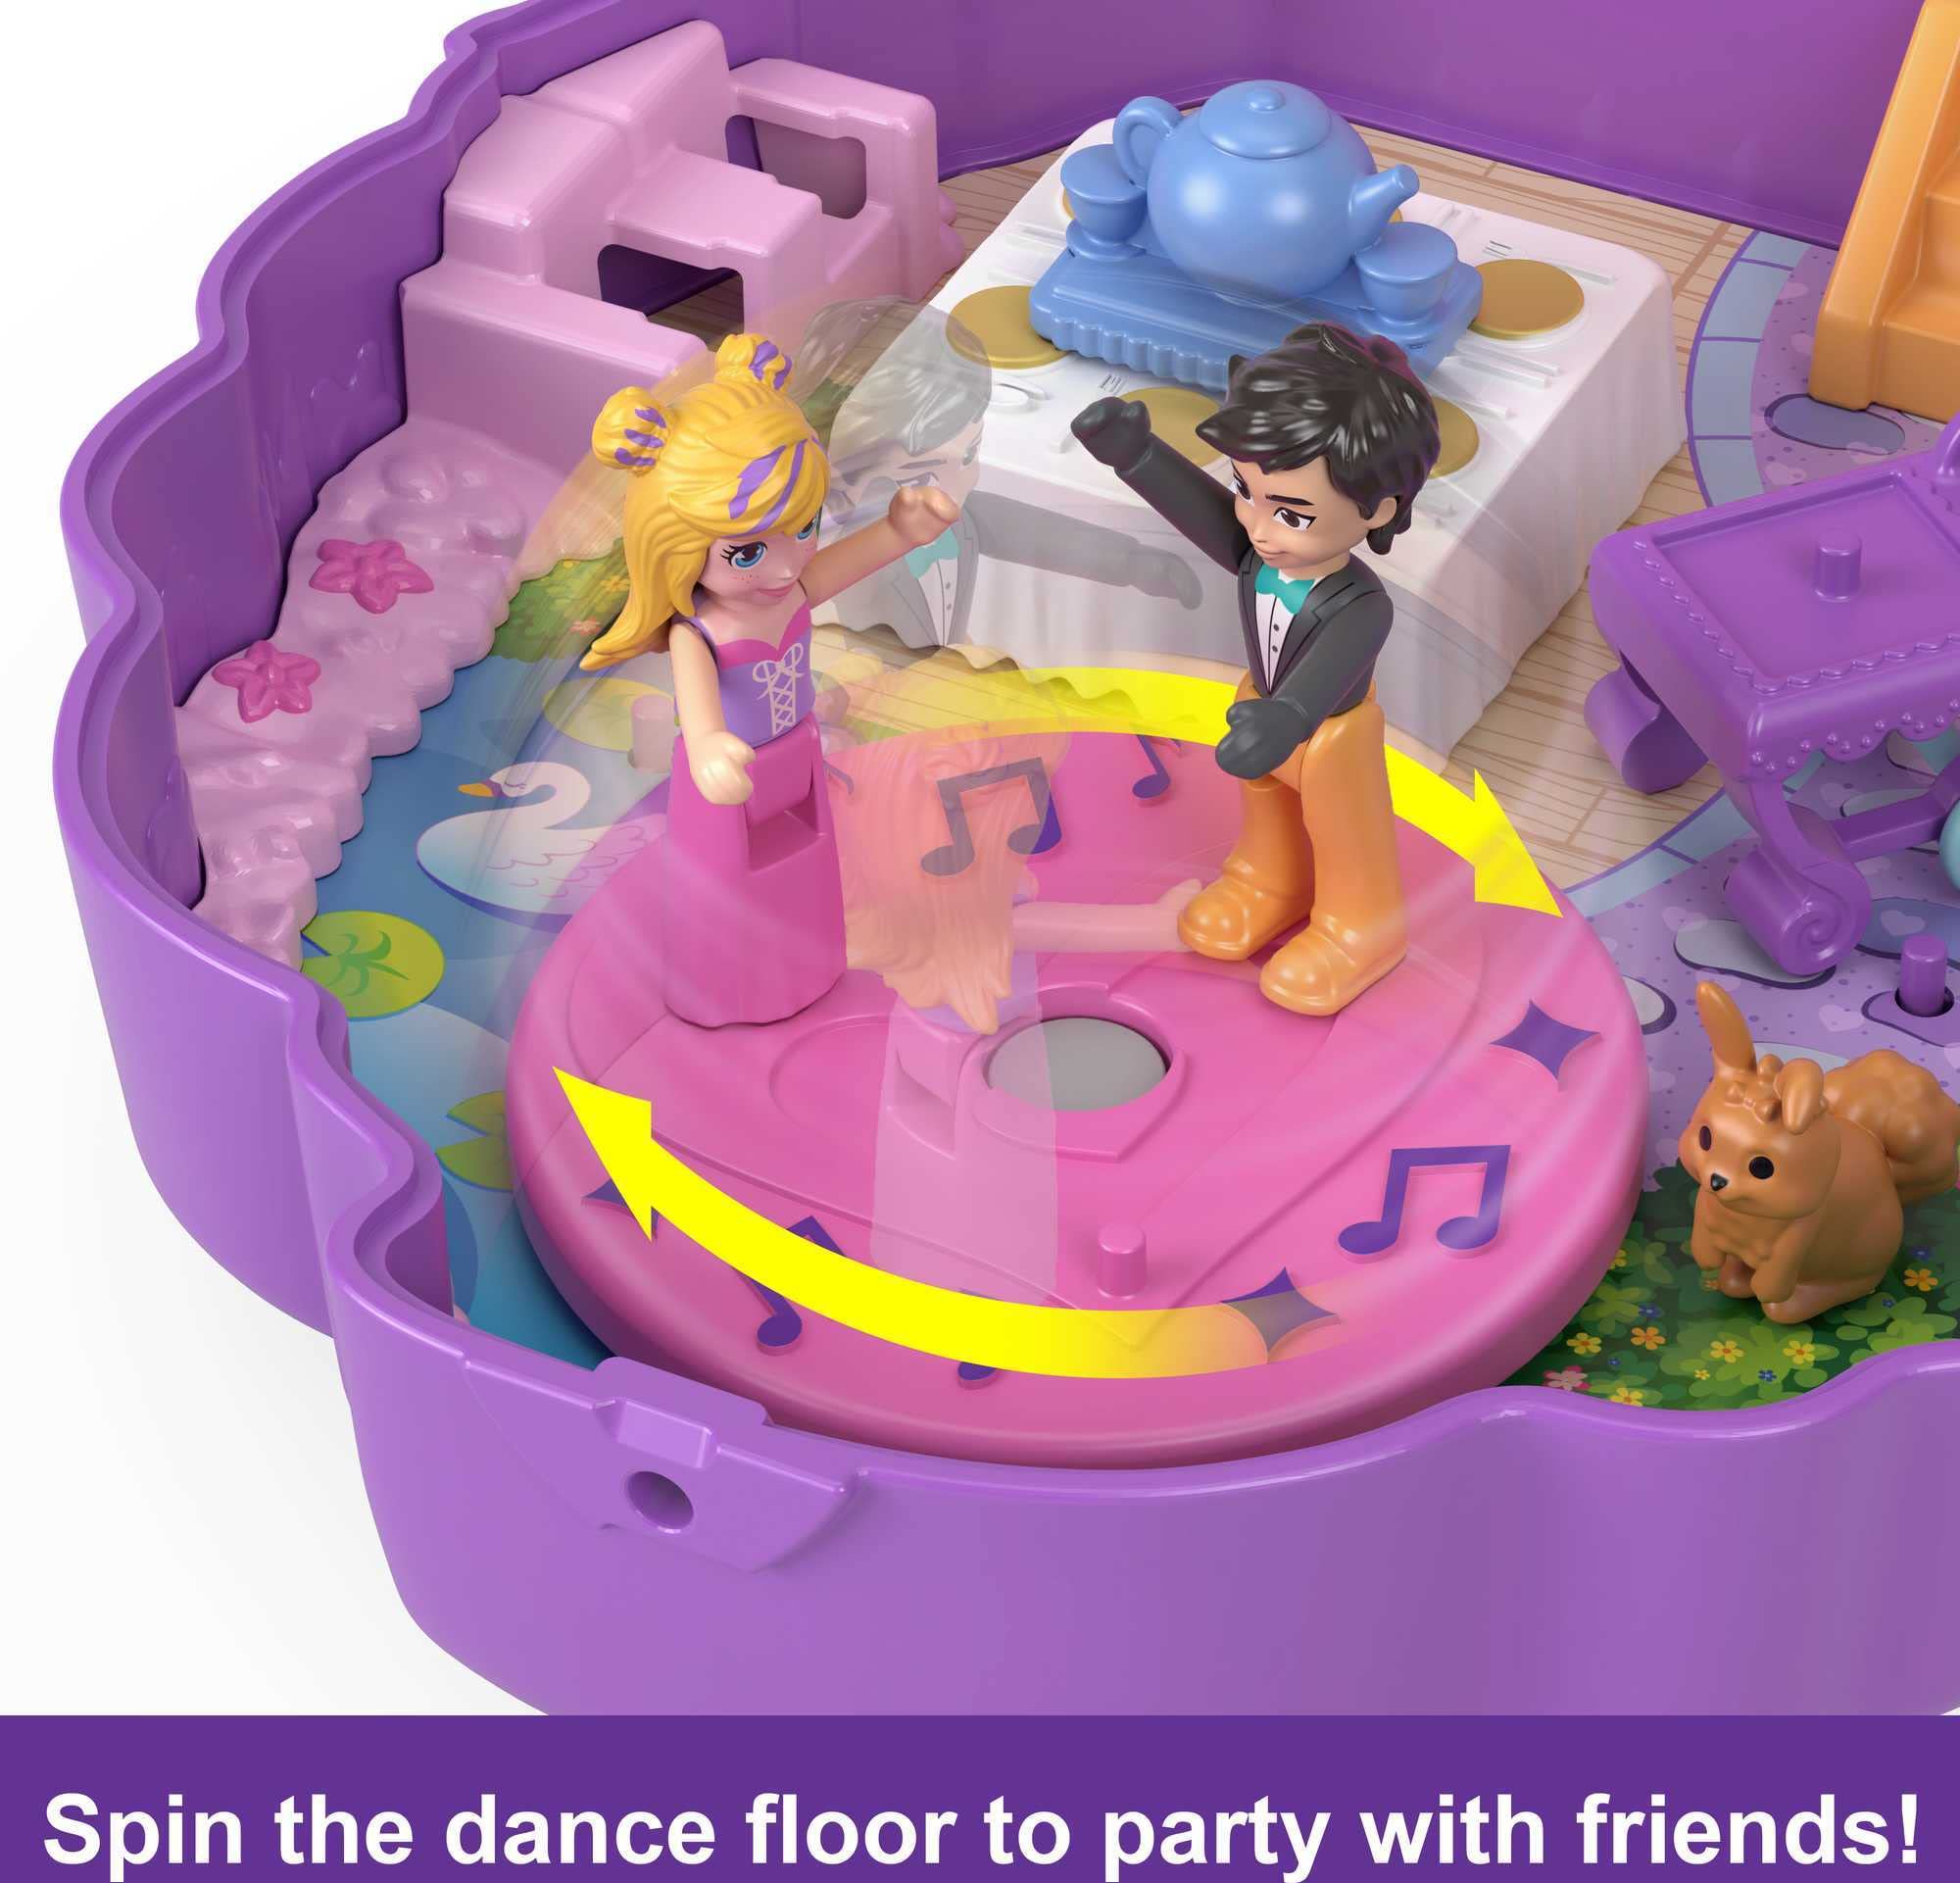 Polly Pocket Compact Playset, Something Sweet Cupcake with 2 Micro Dolls & Accessories, Travel Toys with Surprises